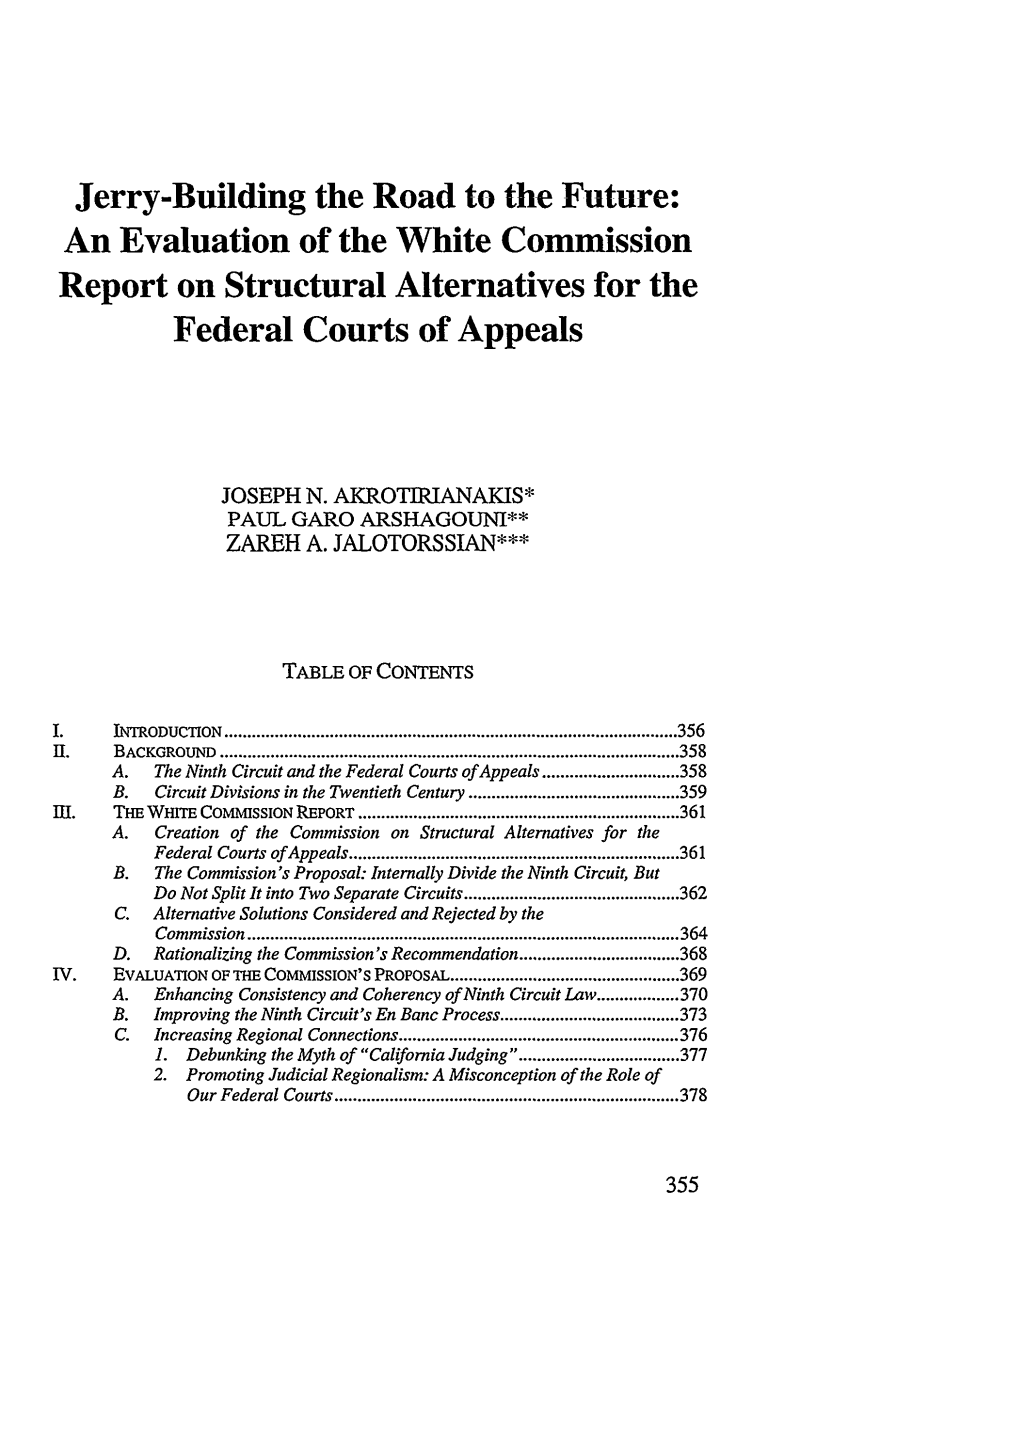 Jerry-Building the Road to the Future: an Evaluation of the White Commission Report on Structural Alternatives for the Federal Courts of Appeals